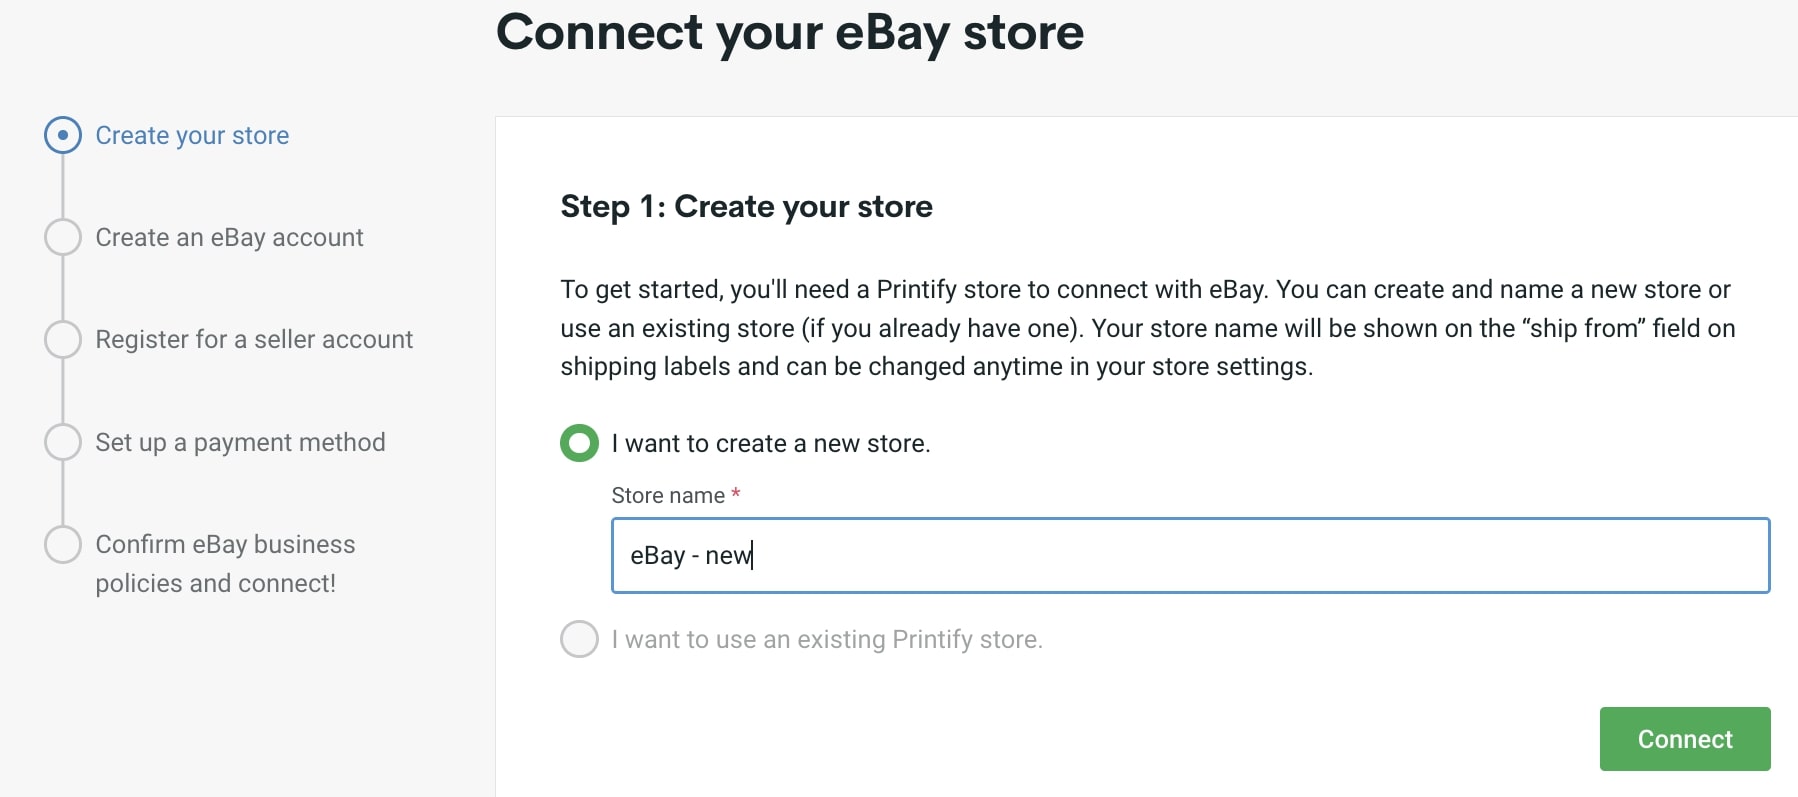 The step 1 page, "Create your store," in the "Connect your eBay store" section of the Printify website. There is a field for filling in your new store name and a green button with "Connect" written in white.